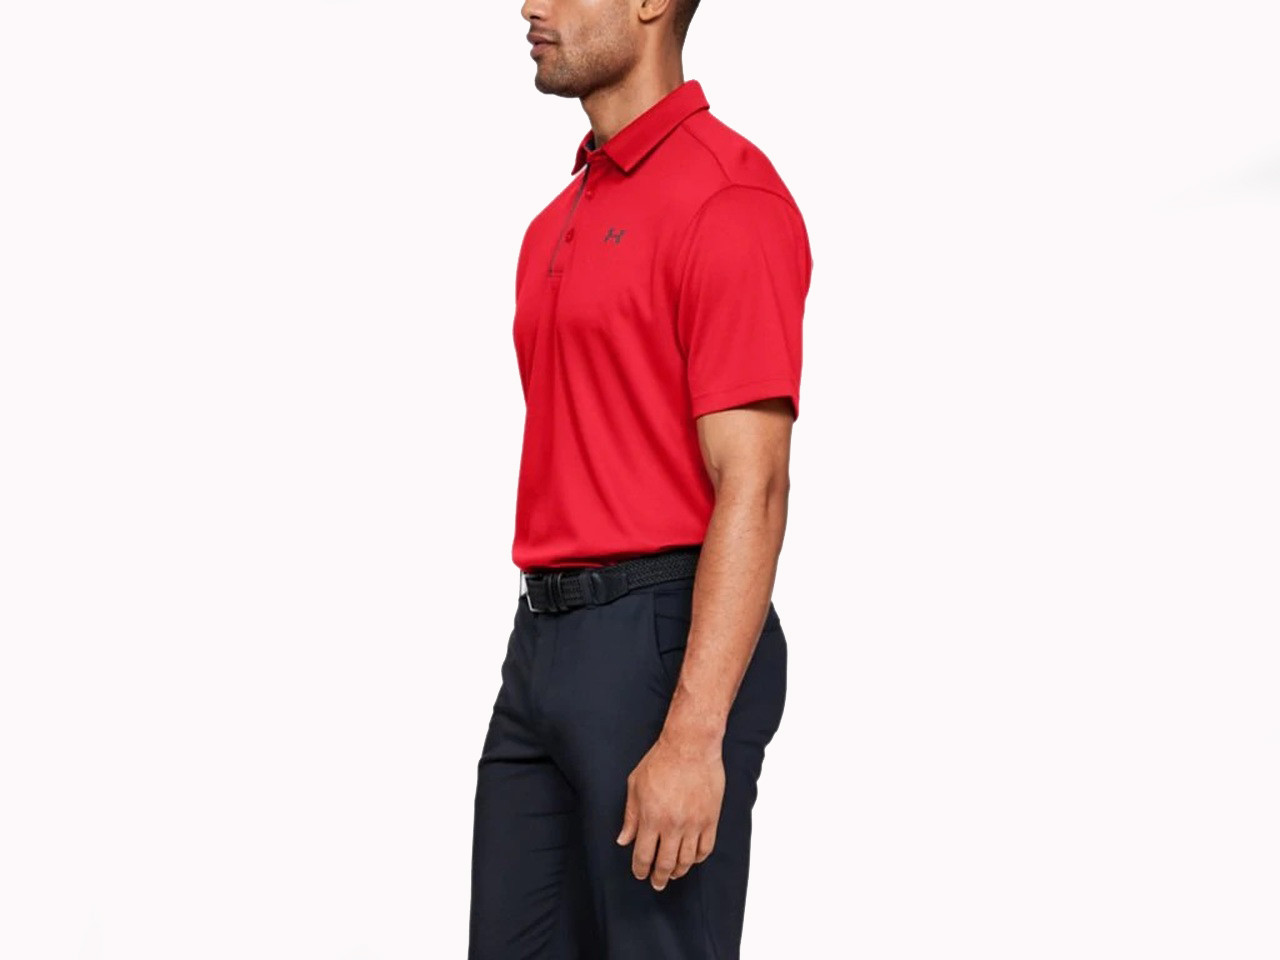 GetUSCart- Under Armour Men's Tech Golf Polo, Red (600)/Graphite, Small